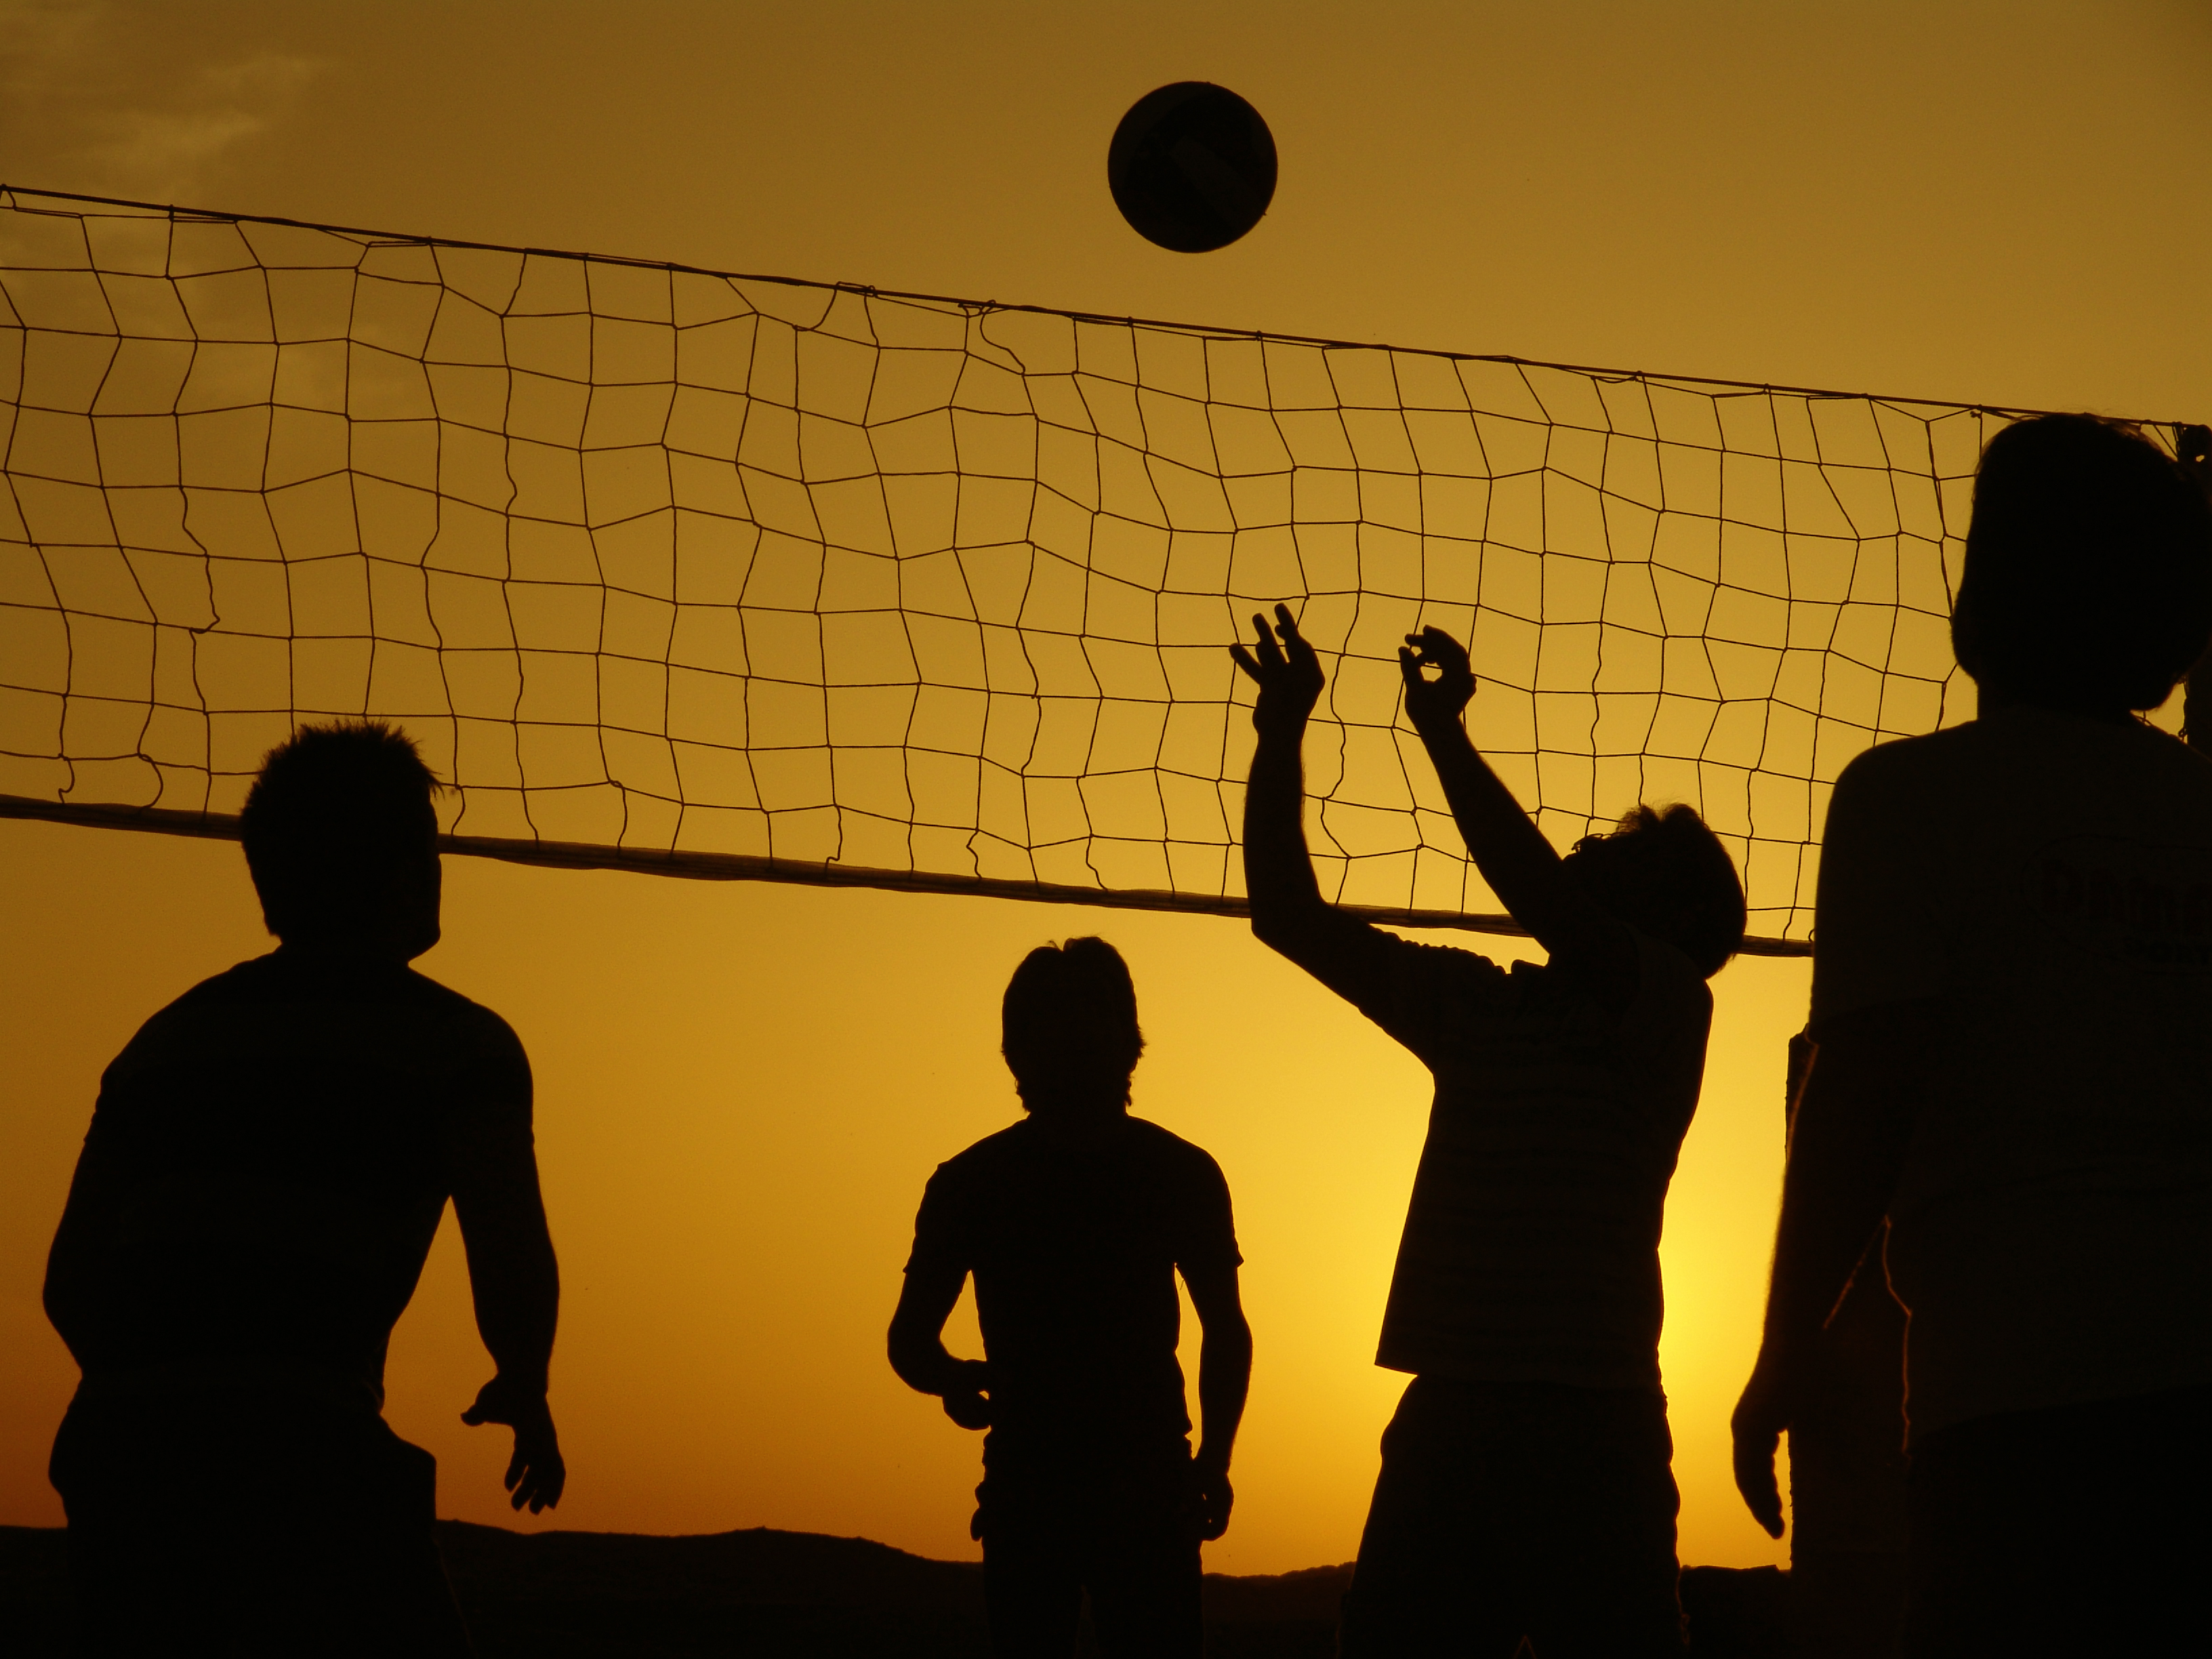 Volleyball Players at Sunset